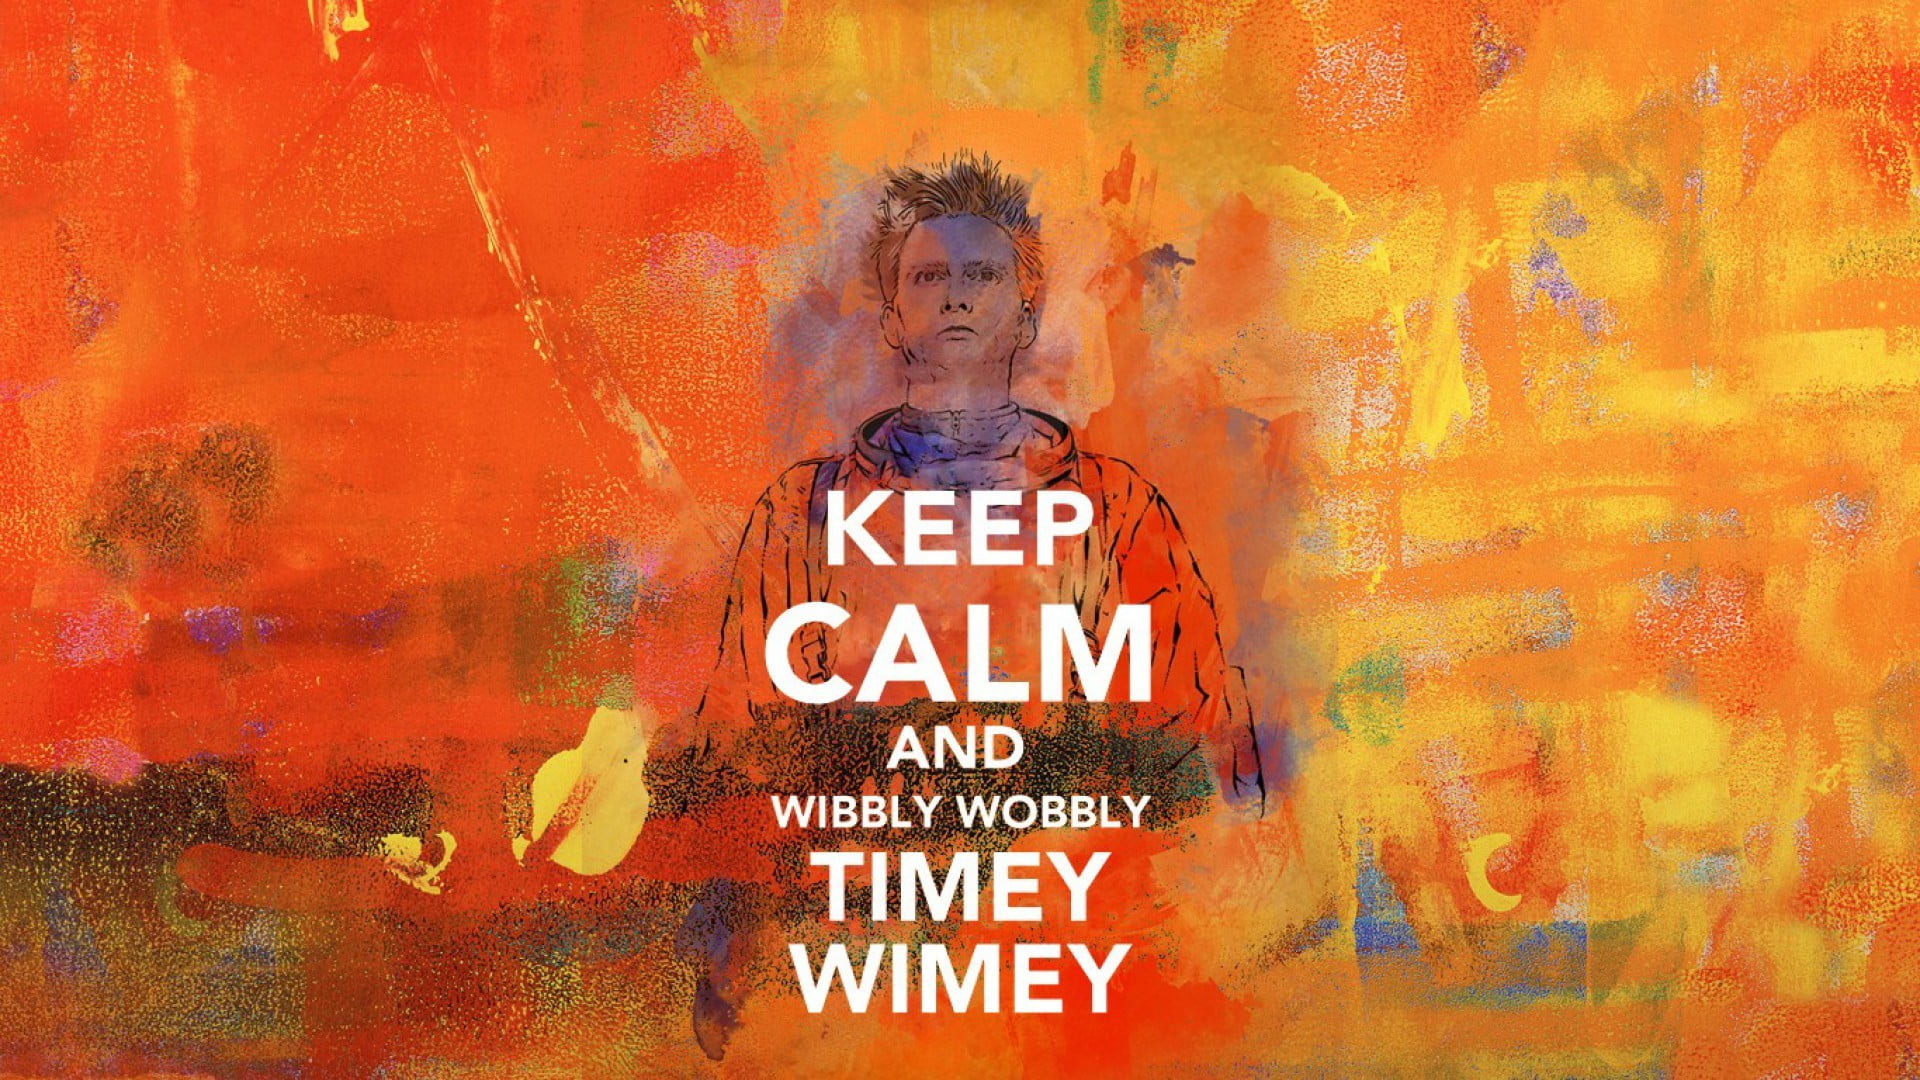 1920x1080 Keep Calm and Wibbly Wobbly Timey Wimey wallpaper, Doctor Who, The Doctor,  David